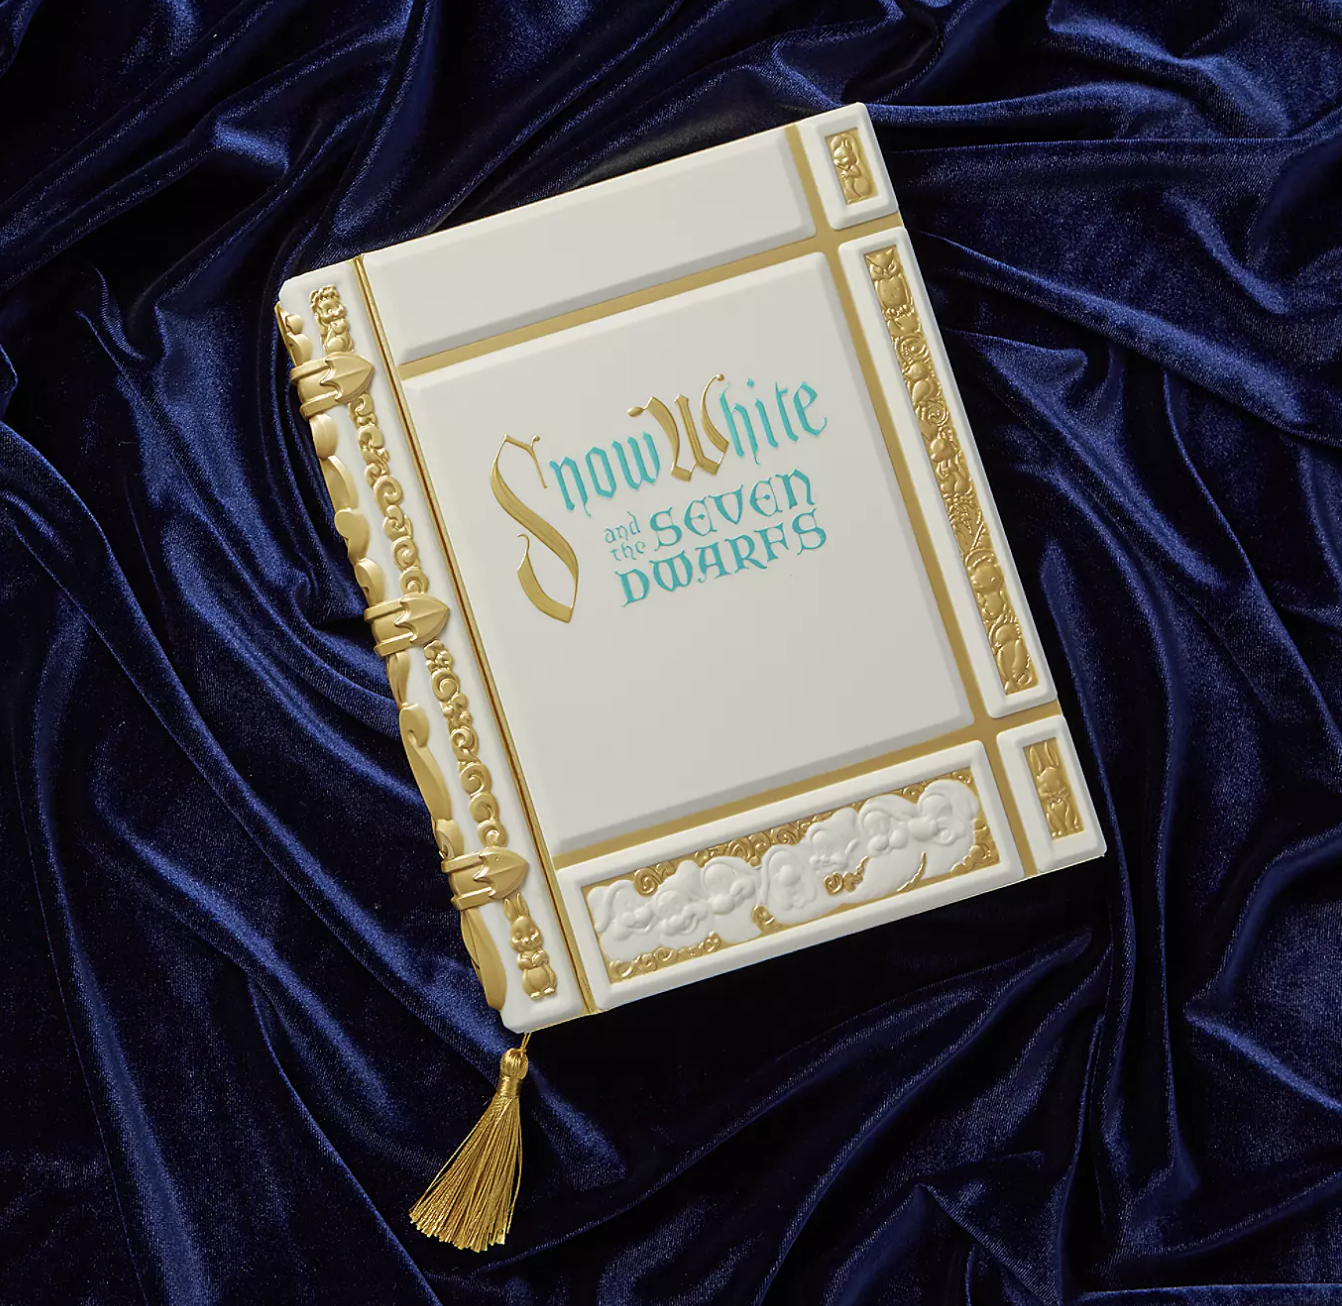 the journal, which has golden filigree and accents, gilded edges, and a golden tassel bookmark
